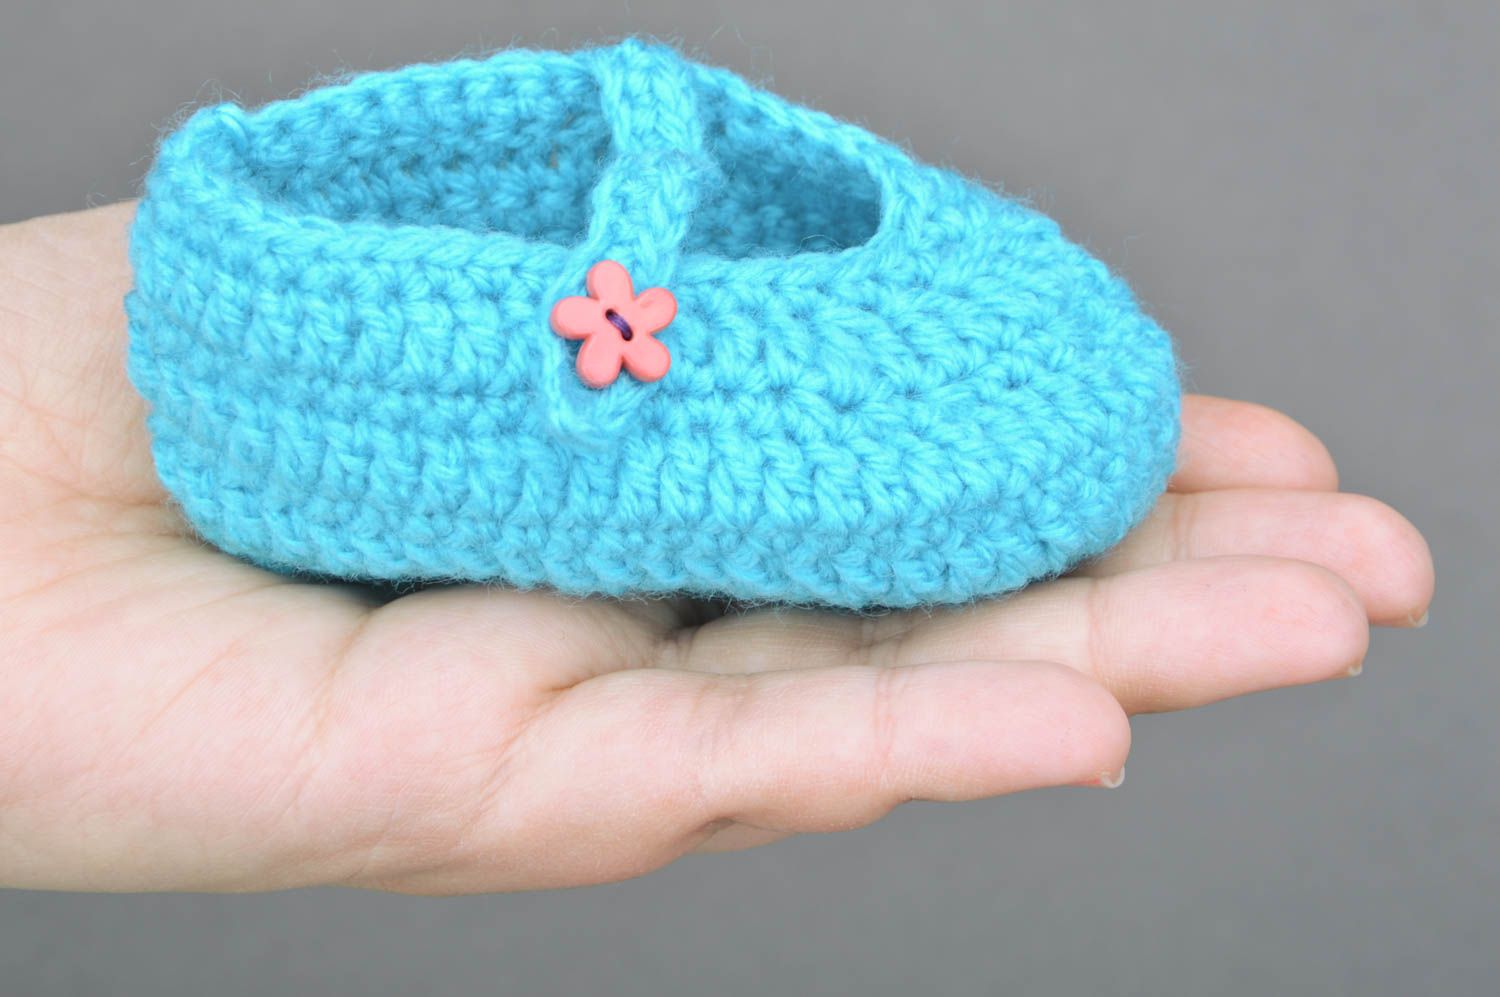 Handcrafted small designer blue baby-shoes made of acrylic yarn with buttons photo 5